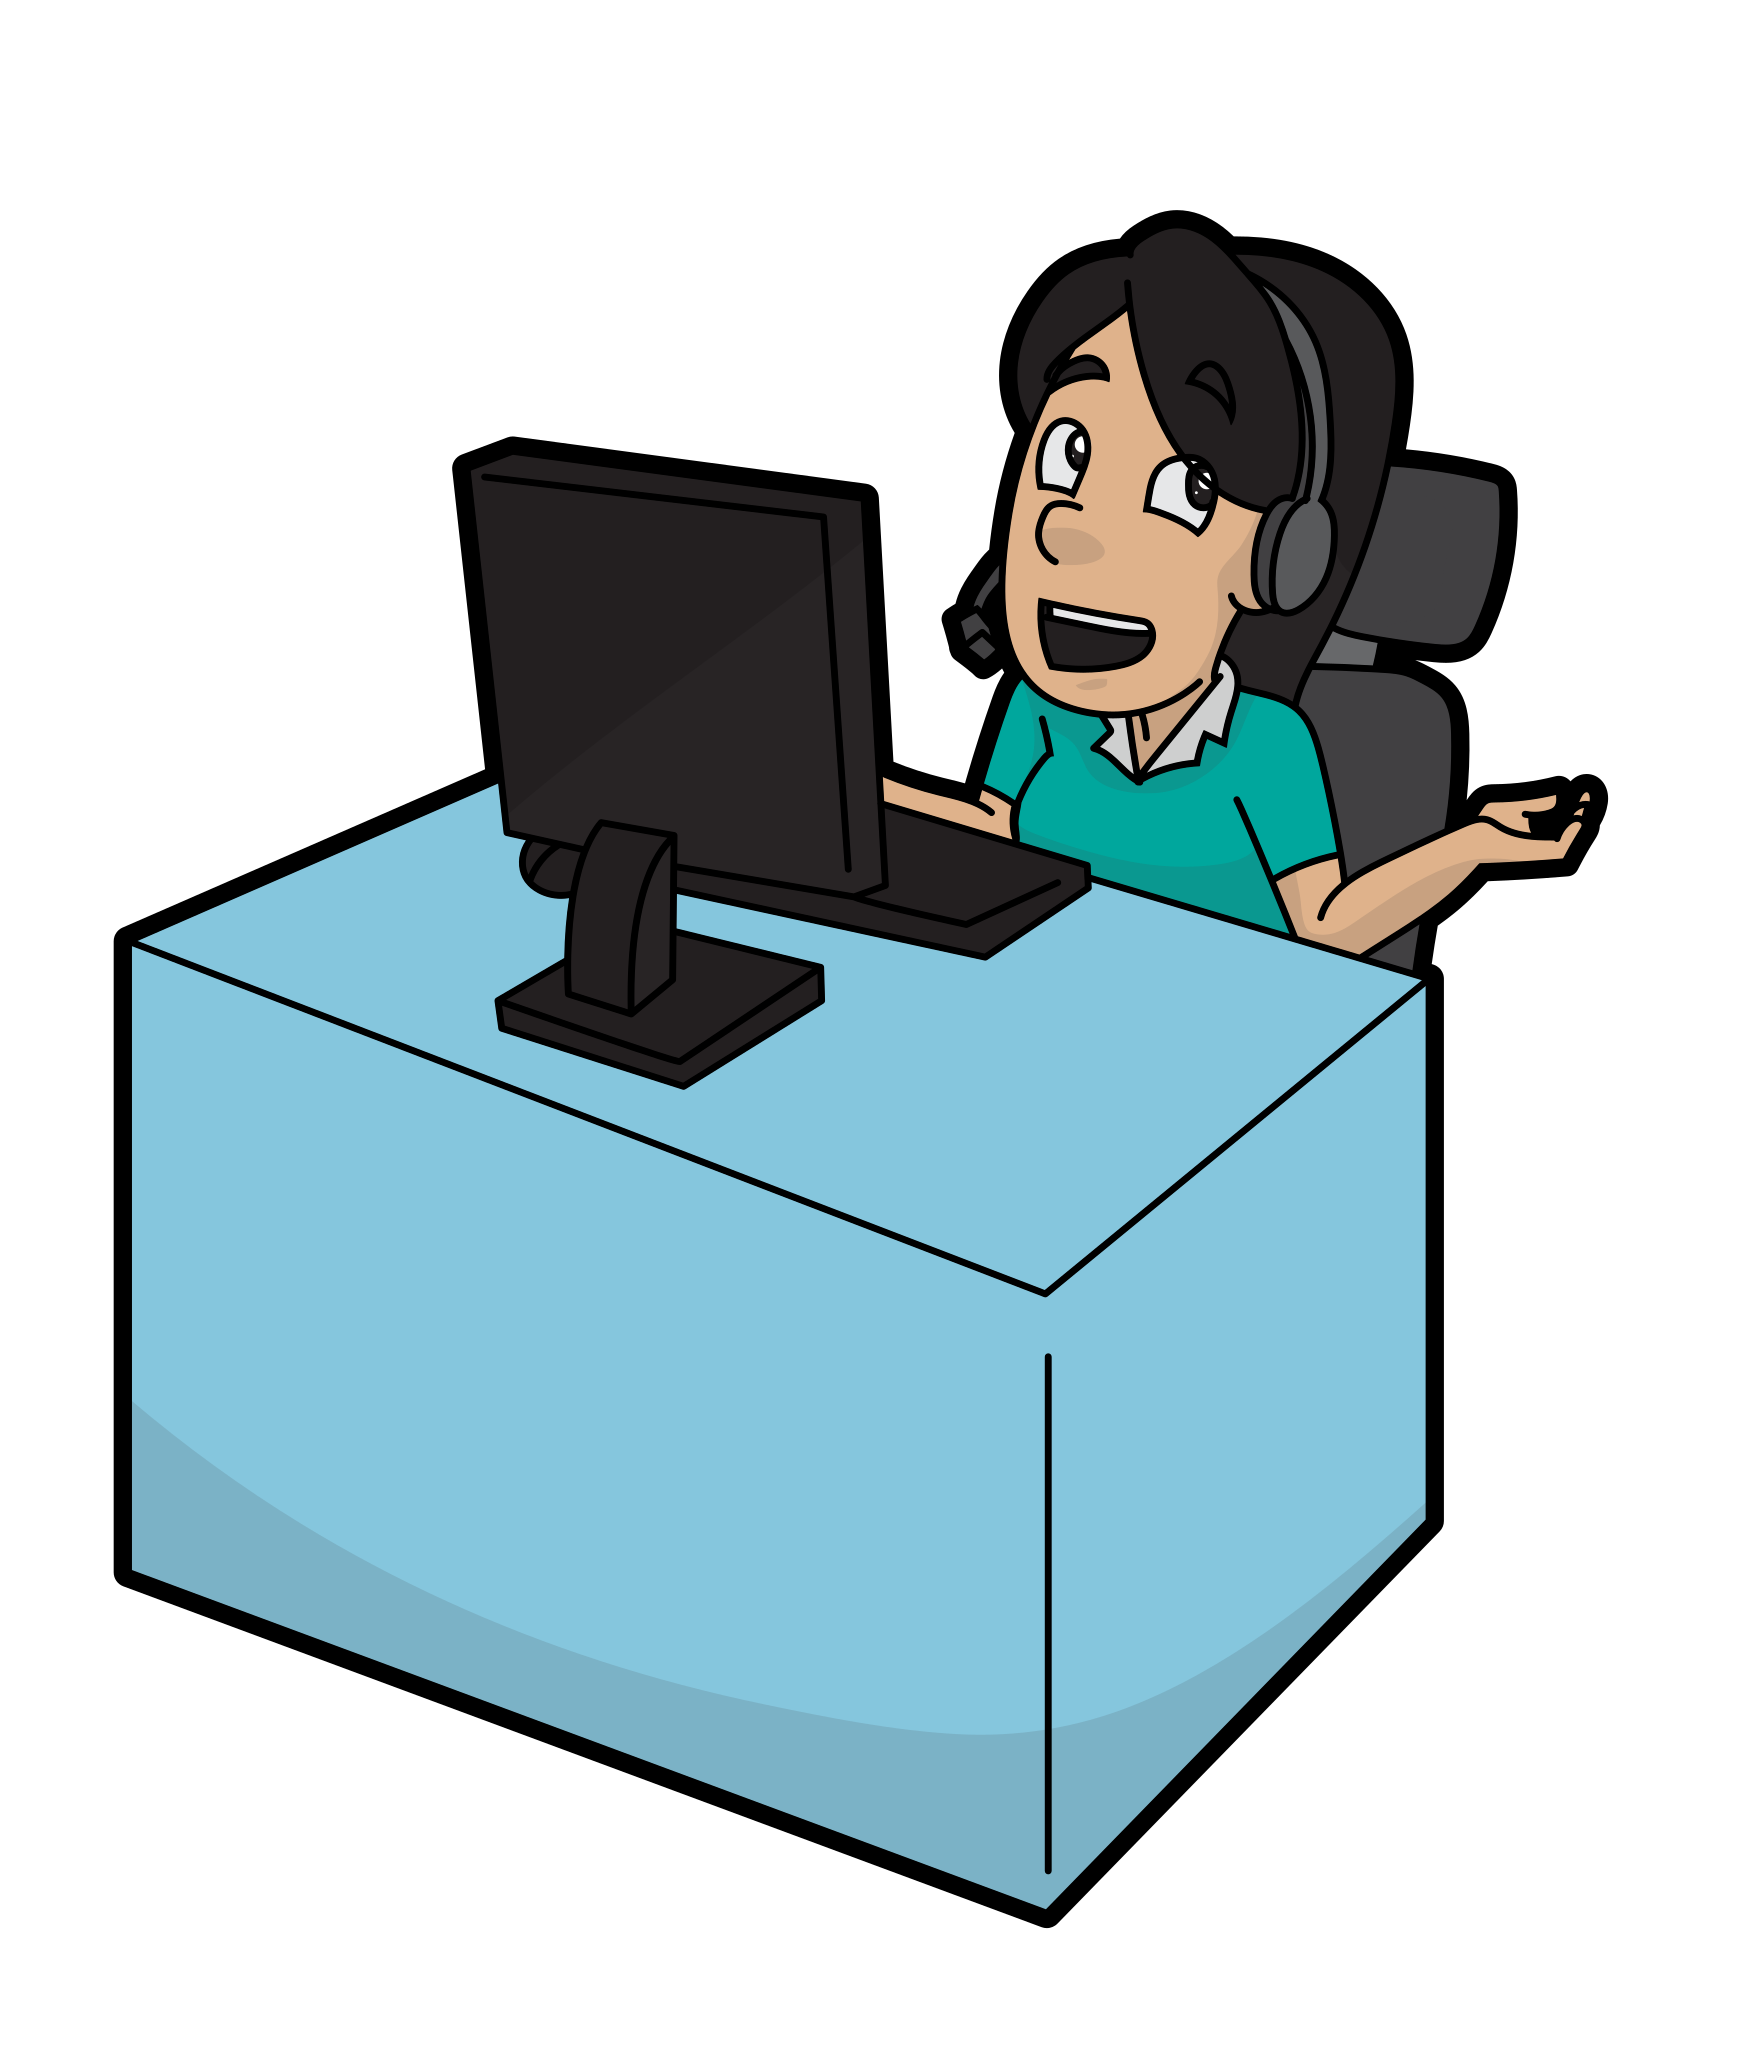 File:Cartoon Woman Working At A Call  - Wikimedia Commons